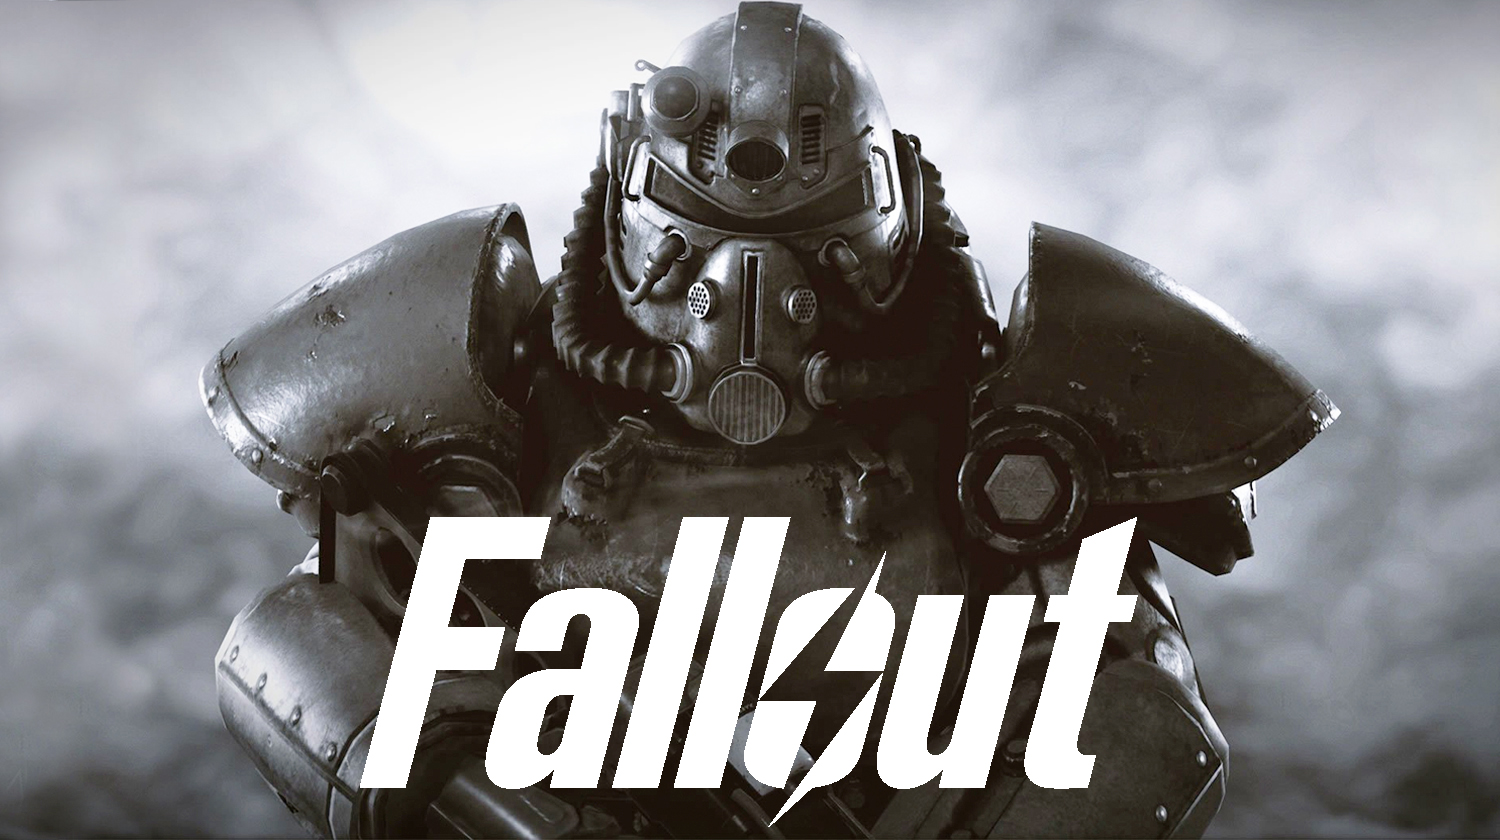 'Fallout' series from Amazon appoints showrunners, Jonathan Nolan to direct premiere thumbnail